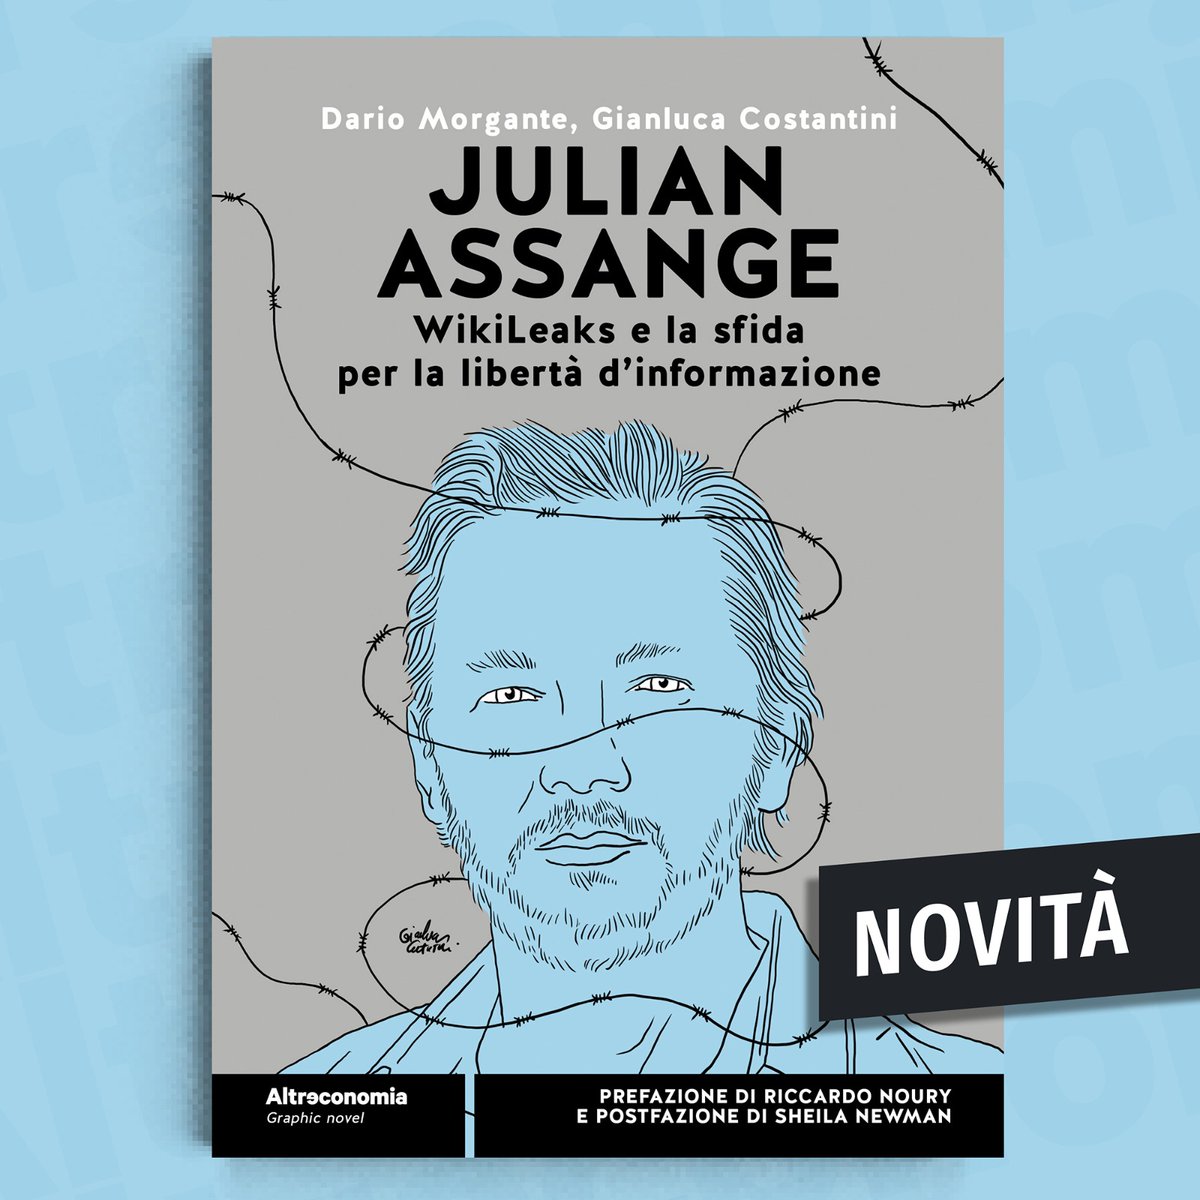 With great pleasure, and also a bit of emotion, today on the International Day of Press Freedom proclaimed by the United Nations @UN, @altreconomia, an Italian publishing house, has sent to print the graphic novel 'Julian Assange. @Wikileaks and the challenge for freedom of…